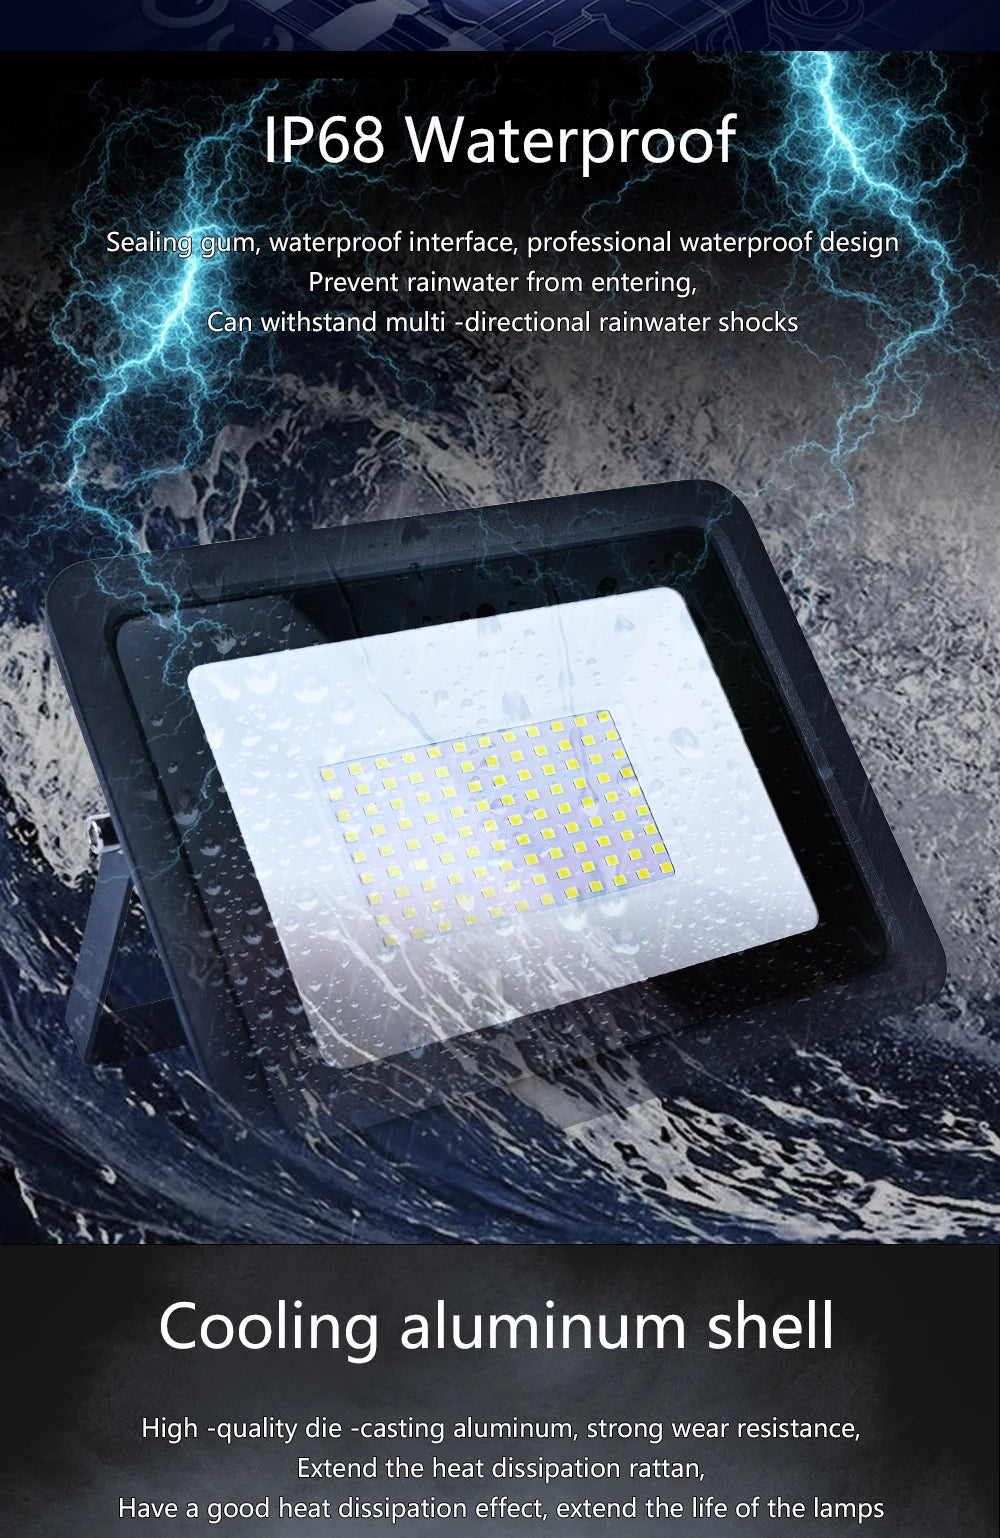 LED Flood Light, Water-resistant design for outdoor use, with aluminum shell and heat dissipation to extend lamp life.